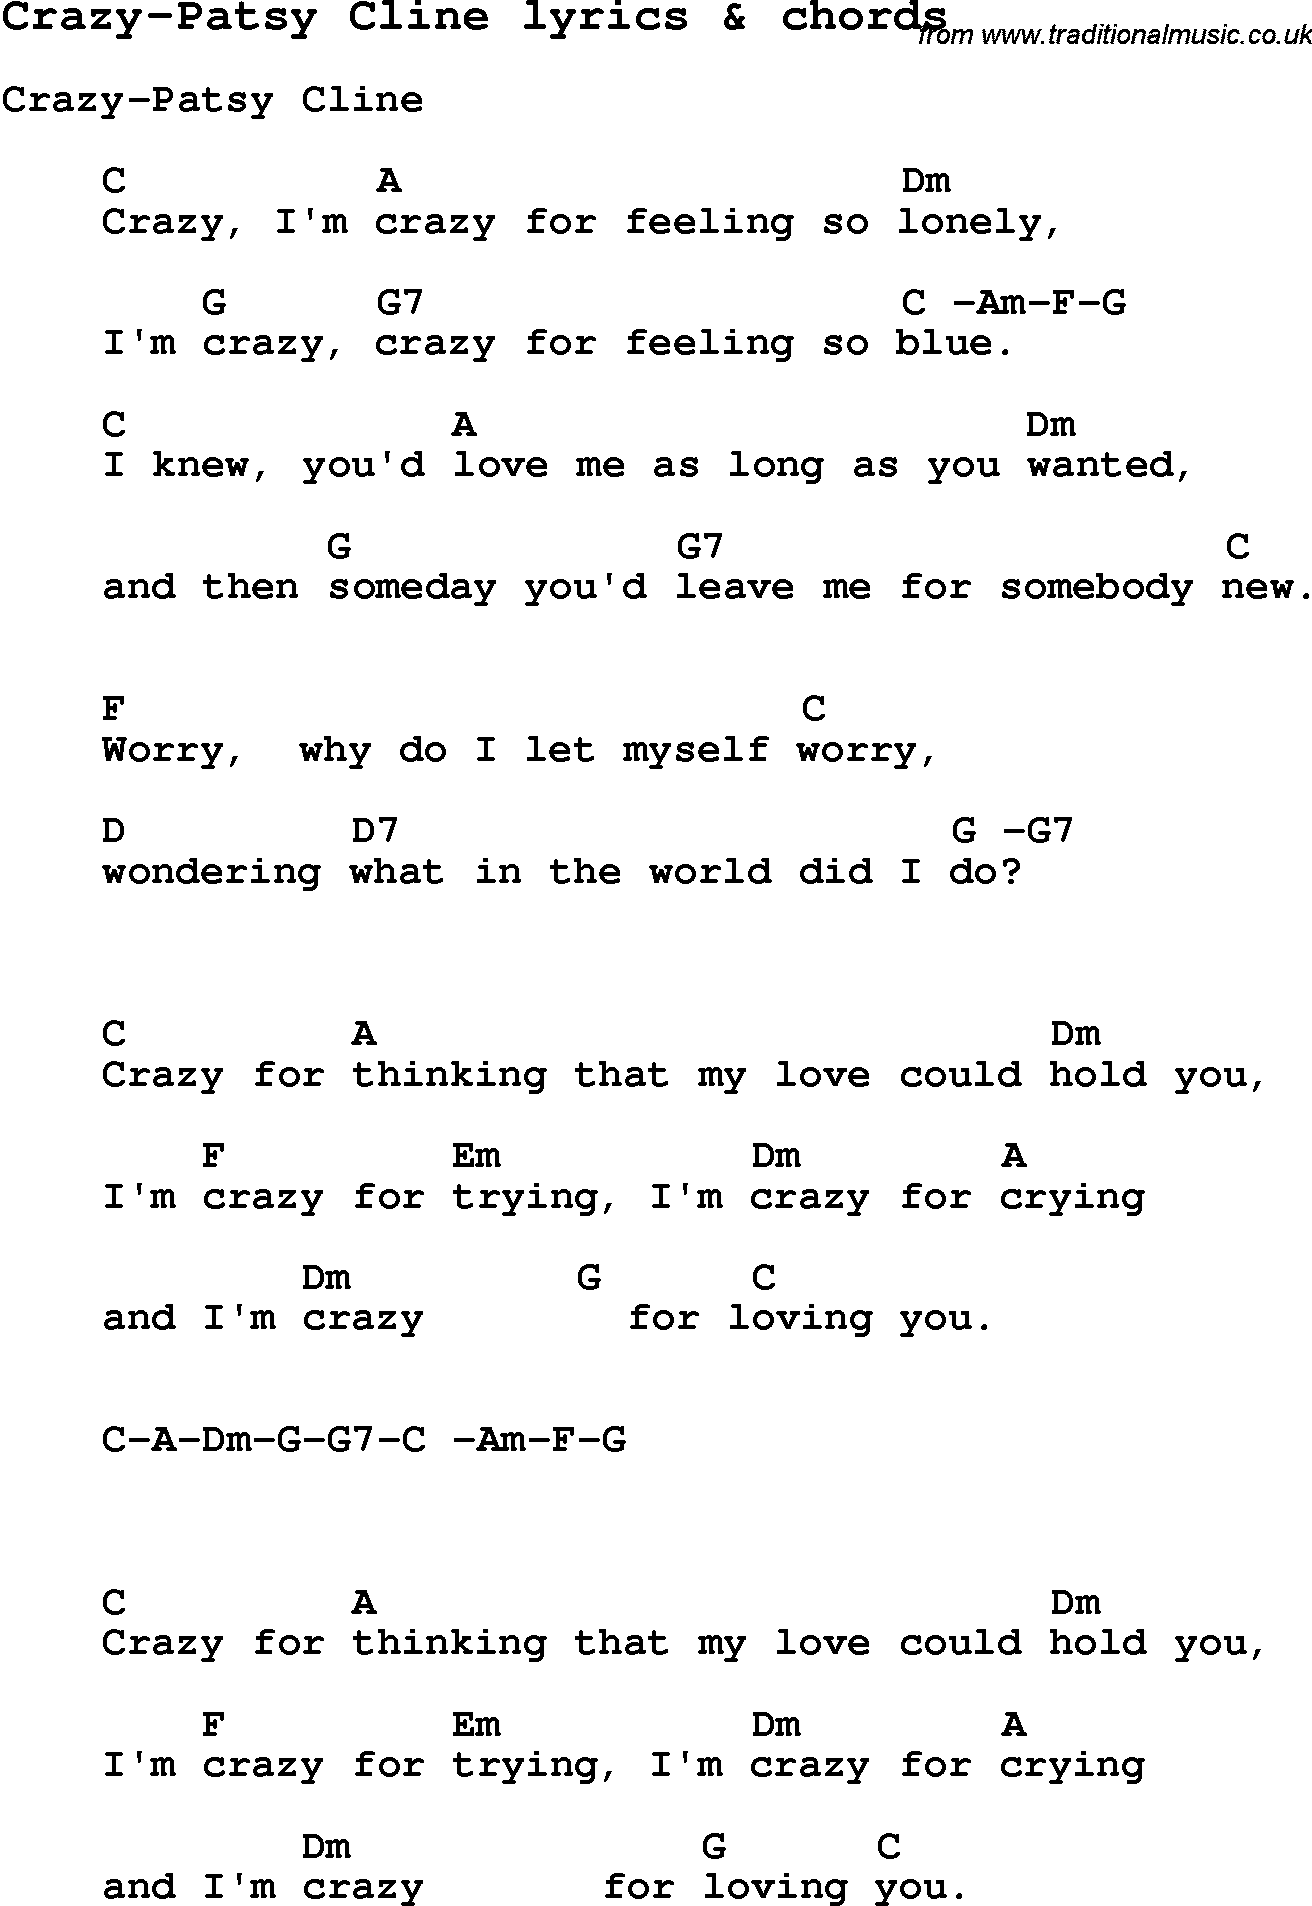 Love Song Lyrics for:Crazy-Patsy Cline with chords.